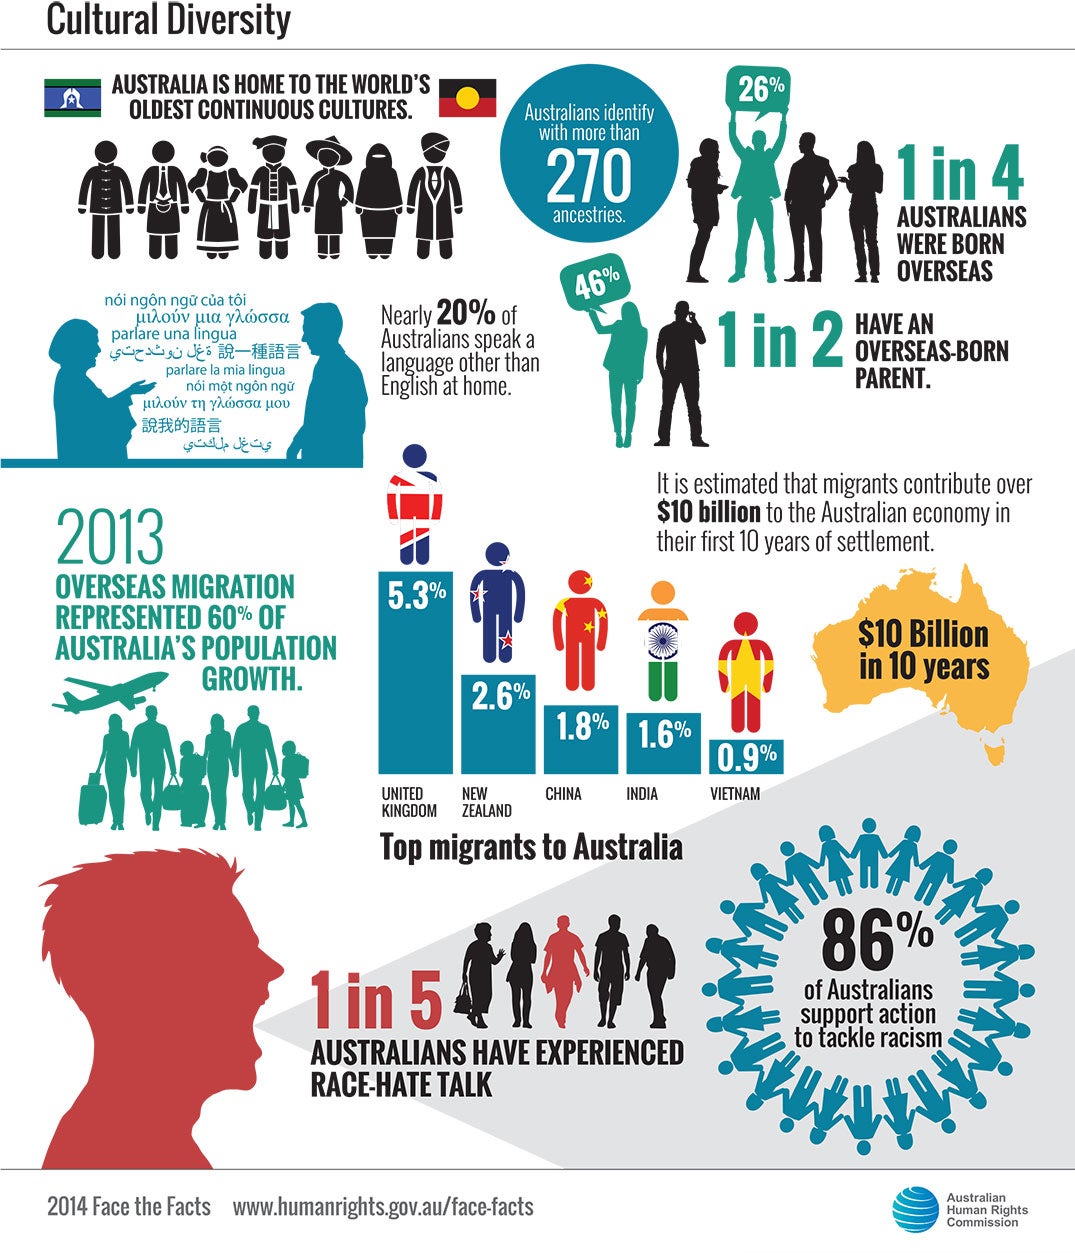 Face the facts: Cultural Diversity | Australian Human Rights Commission